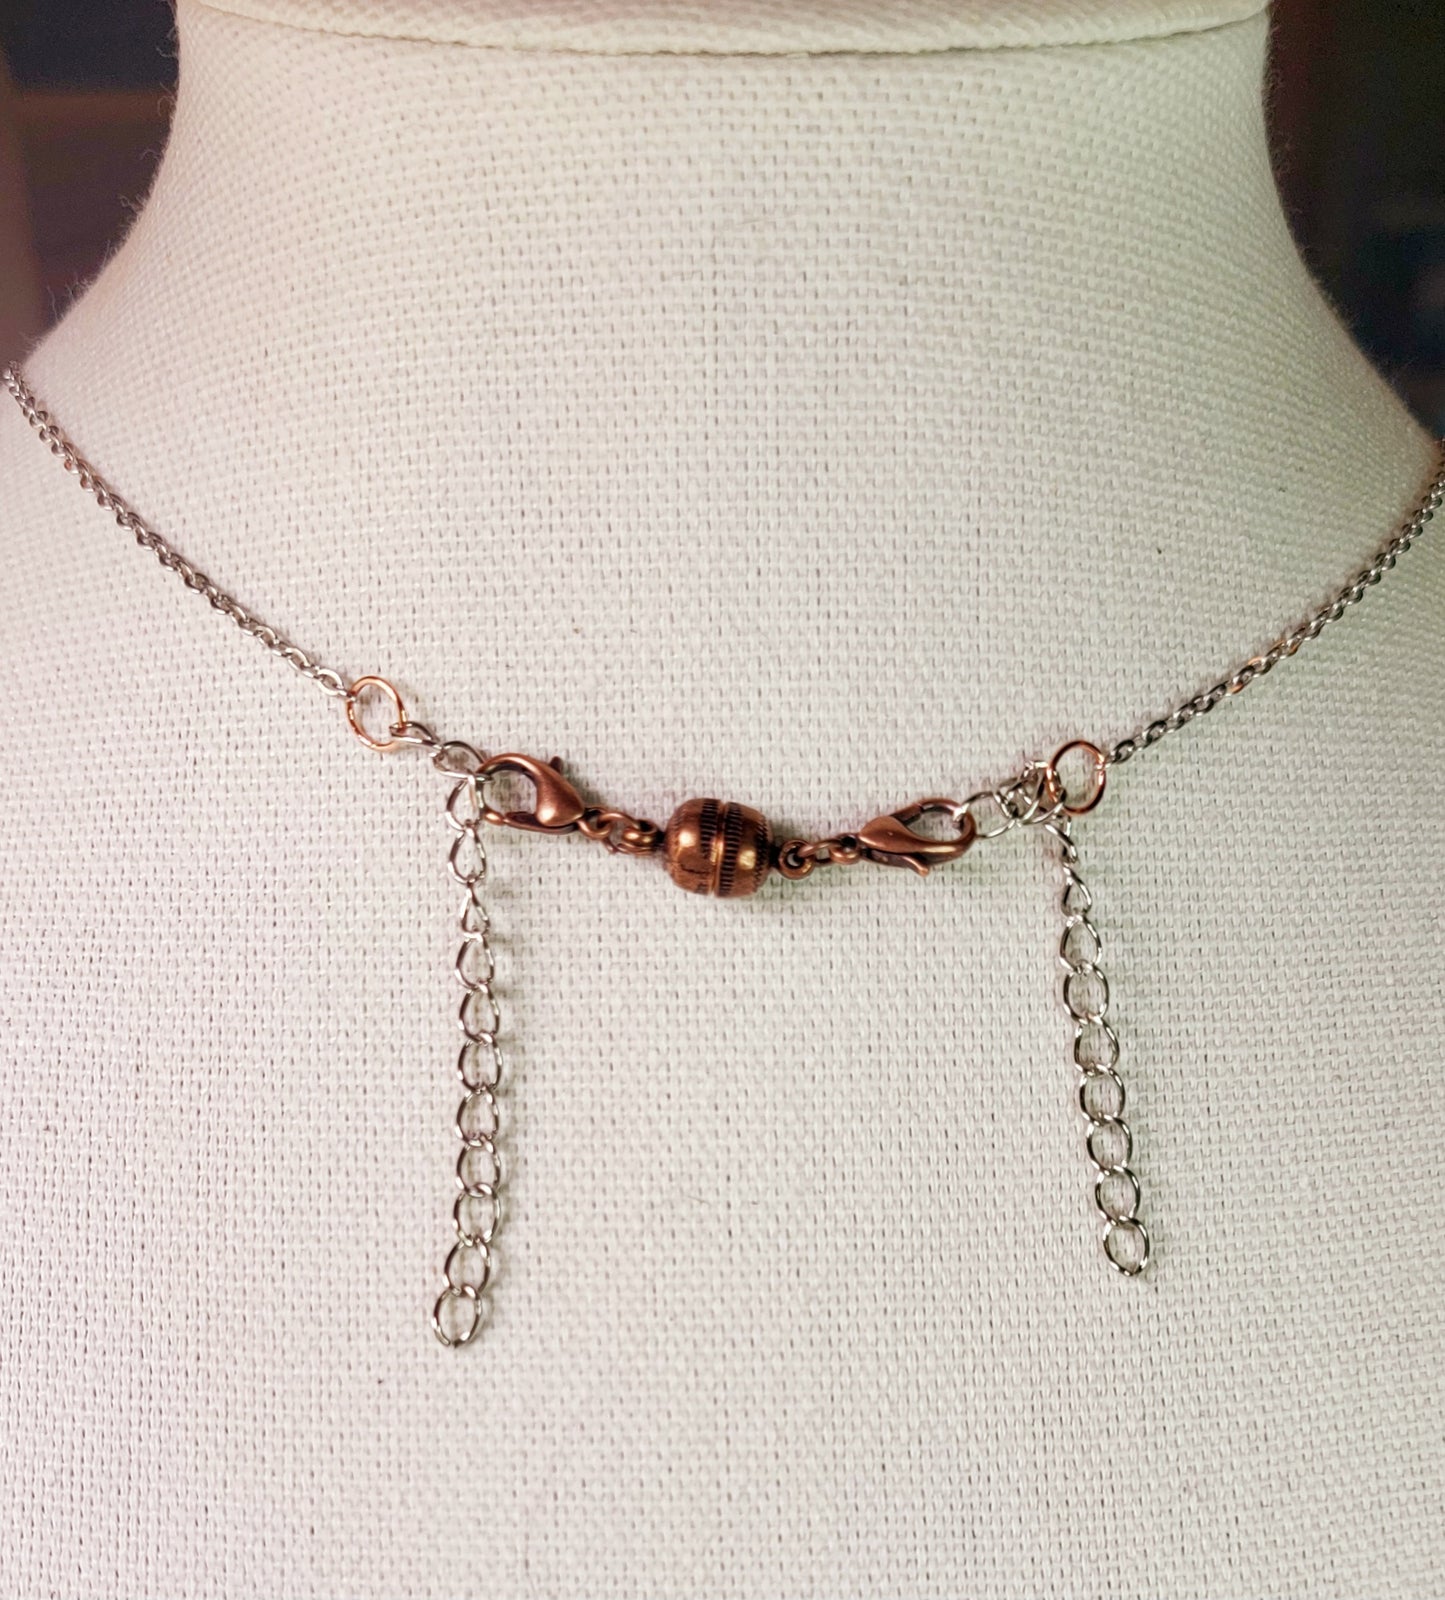 Necklace - Amethyst, Copper and Silver